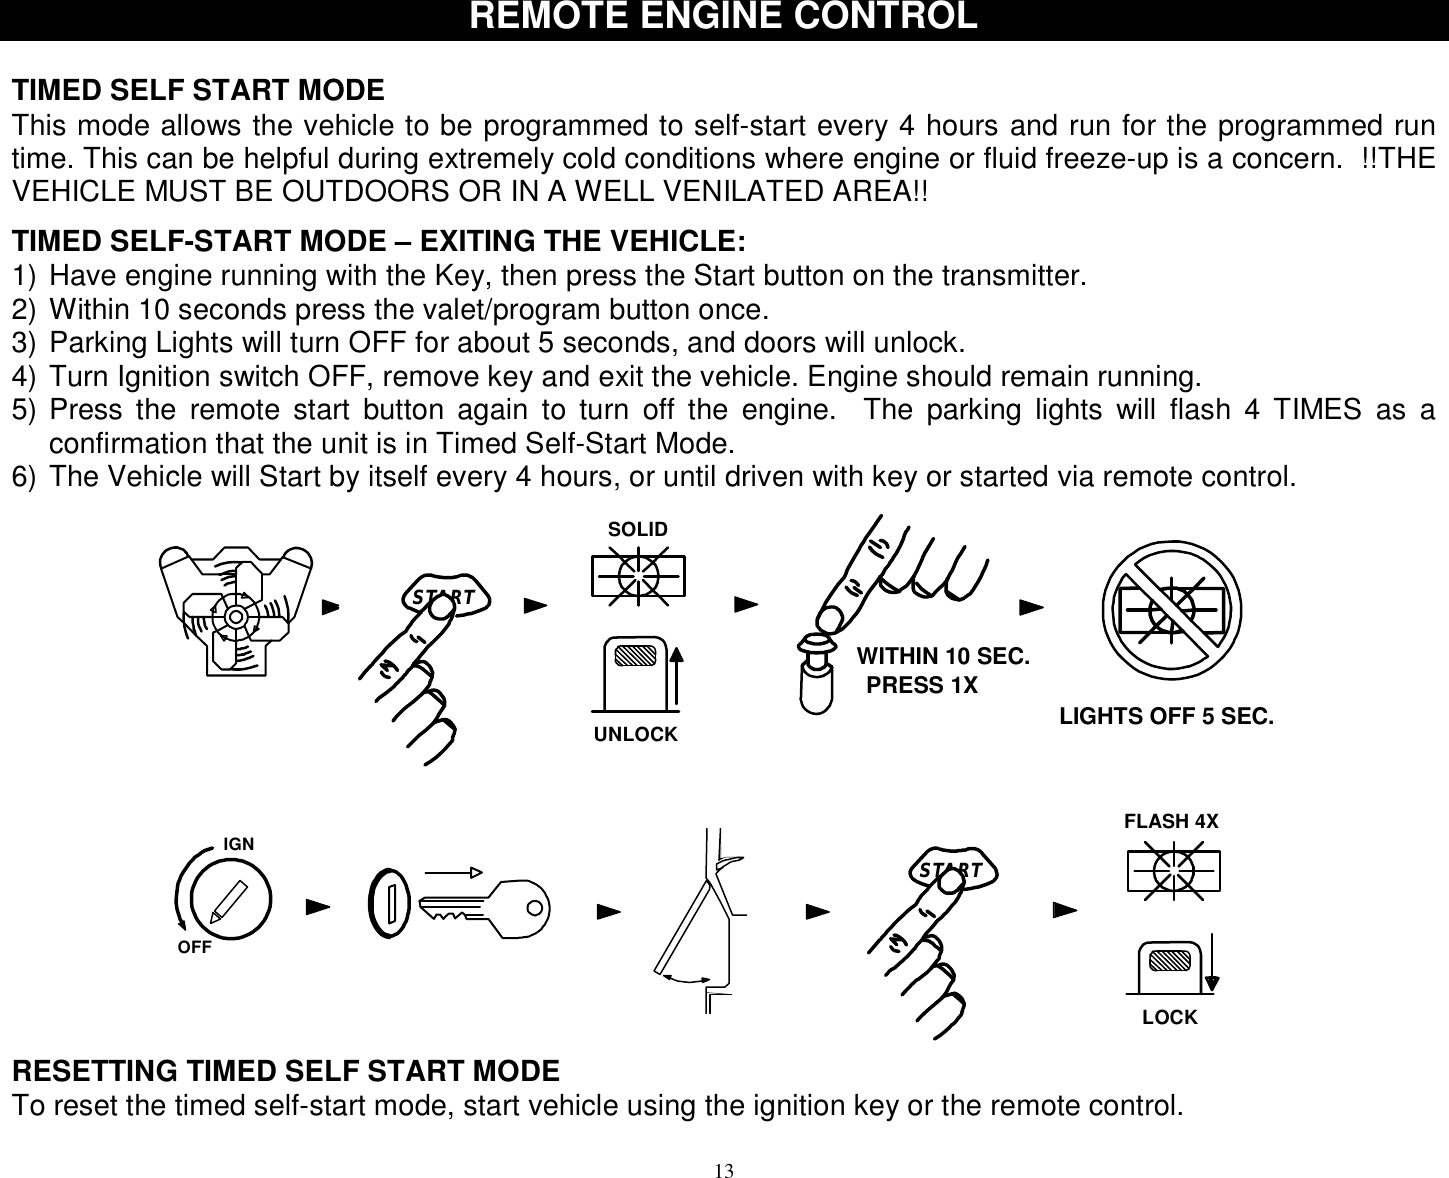  13 REMOTE ENGINE CONTROL  TIMED SELF START MODE This mode allows the vehicle to be programmed to self-start every 4 hours and run for the programmed run time. This can be helpful during extremely cold conditions where engine or fluid freeze-up is a concern.  !!THE VEHICLE MUST BE OUTDOORS OR IN A WELL VENILATED AREA!!  TIMED SELF-START MODE – EXITING THE VEHICLE: 1) Have engine running with the Key, then press the Start button on the transmitter. 2) Within 10 seconds press the valet/program button once. 3) Parking Lights will turn OFF for about 5 seconds, and doors will unlock. 4) Turn Ignition switch OFF, remove key and exit the vehicle. Engine should remain running. 5) Press the remote start button again to turn off the engine.  The parking lights will flash 4 TIMES as a confirmation that the unit is in Timed Self-Start Mode. 6) The Vehicle will Start by itself every 4 hours, or until driven with key or started via remote control. STARTSTARTIGNSOLIDOFFUNLOCKPRESS 1XWITHIN 10 SEC.LIGHTS OFF 5 SEC.FLASH 4XLOCK RESETTING TIMED SELF START MODE To reset the timed self-start mode, start vehicle using the ignition key or the remote control.  